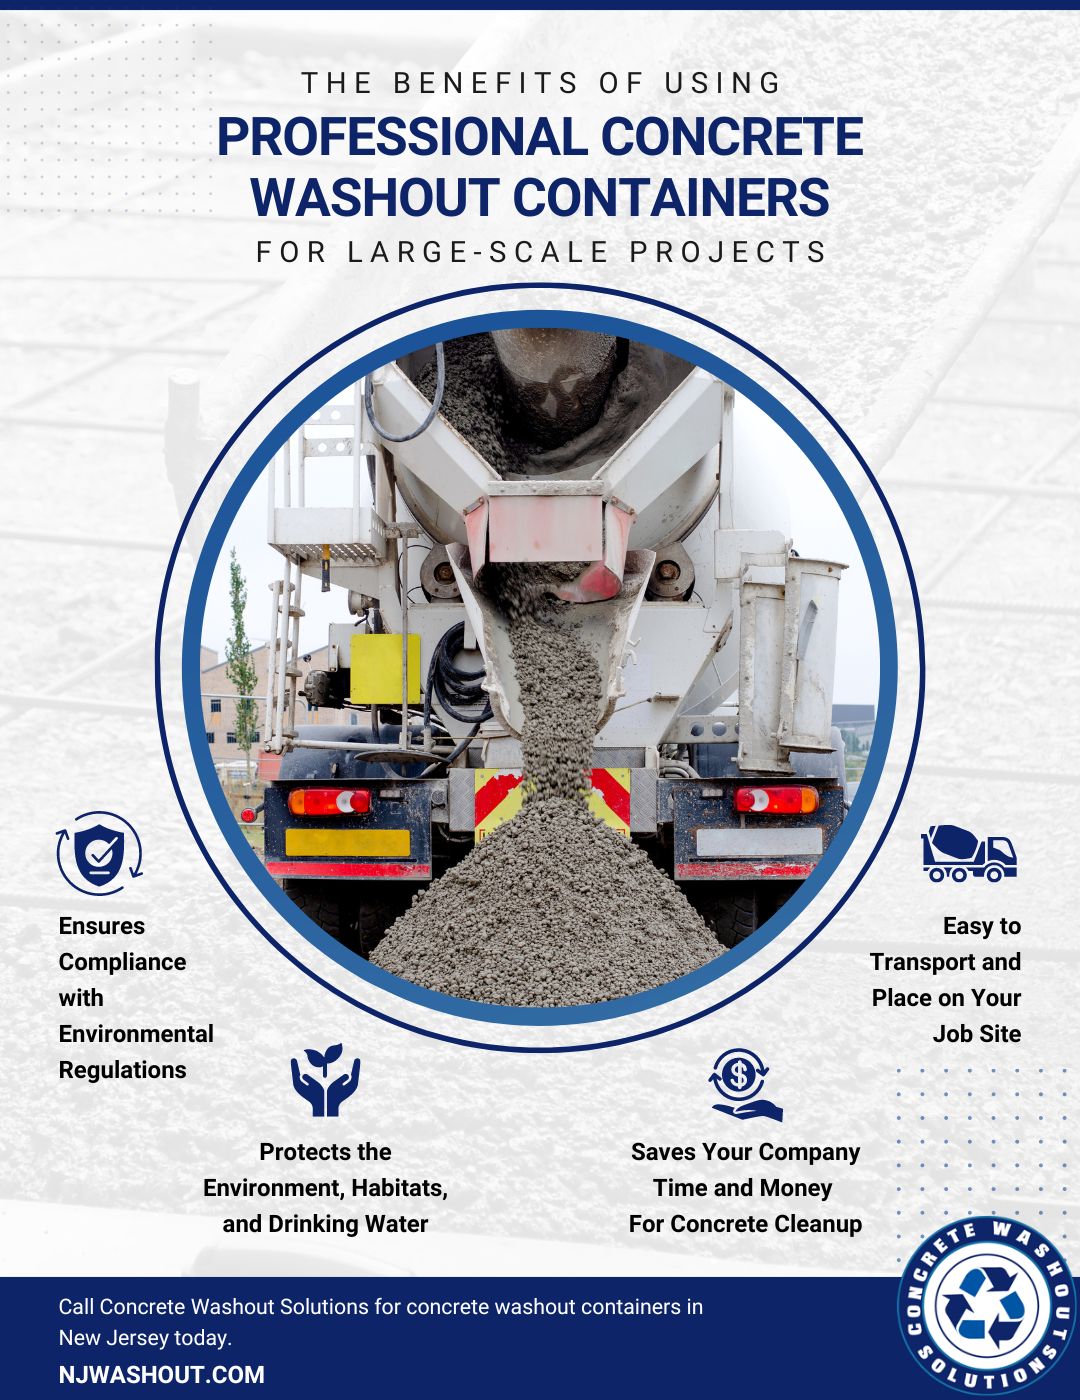 The Benefits of Using Professional Concrete Washout Containers for Large Scale Projects infographic